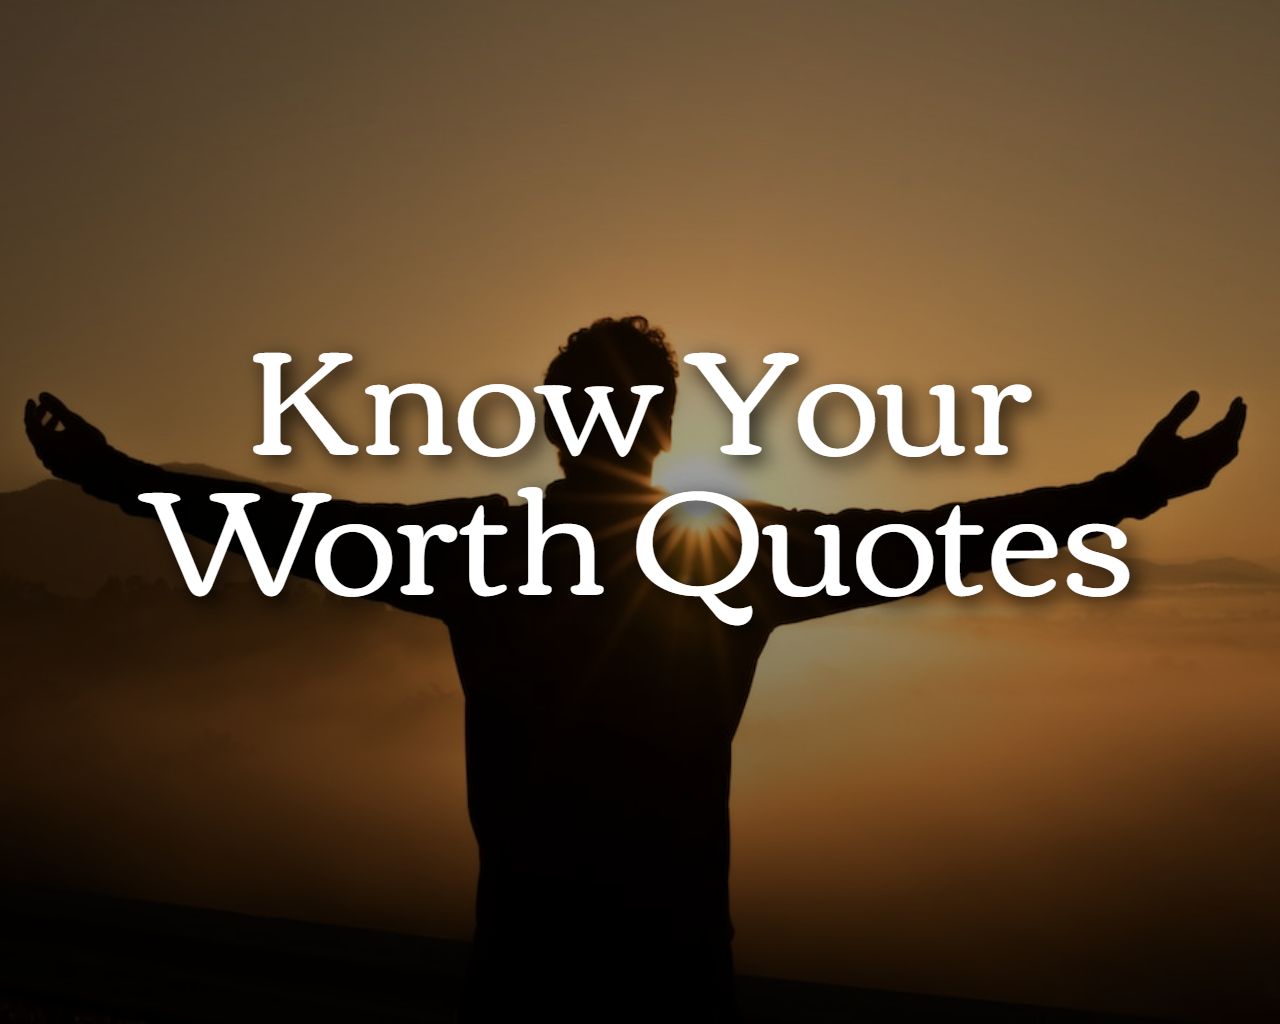 know your worth quotes | The Inspiring Journal